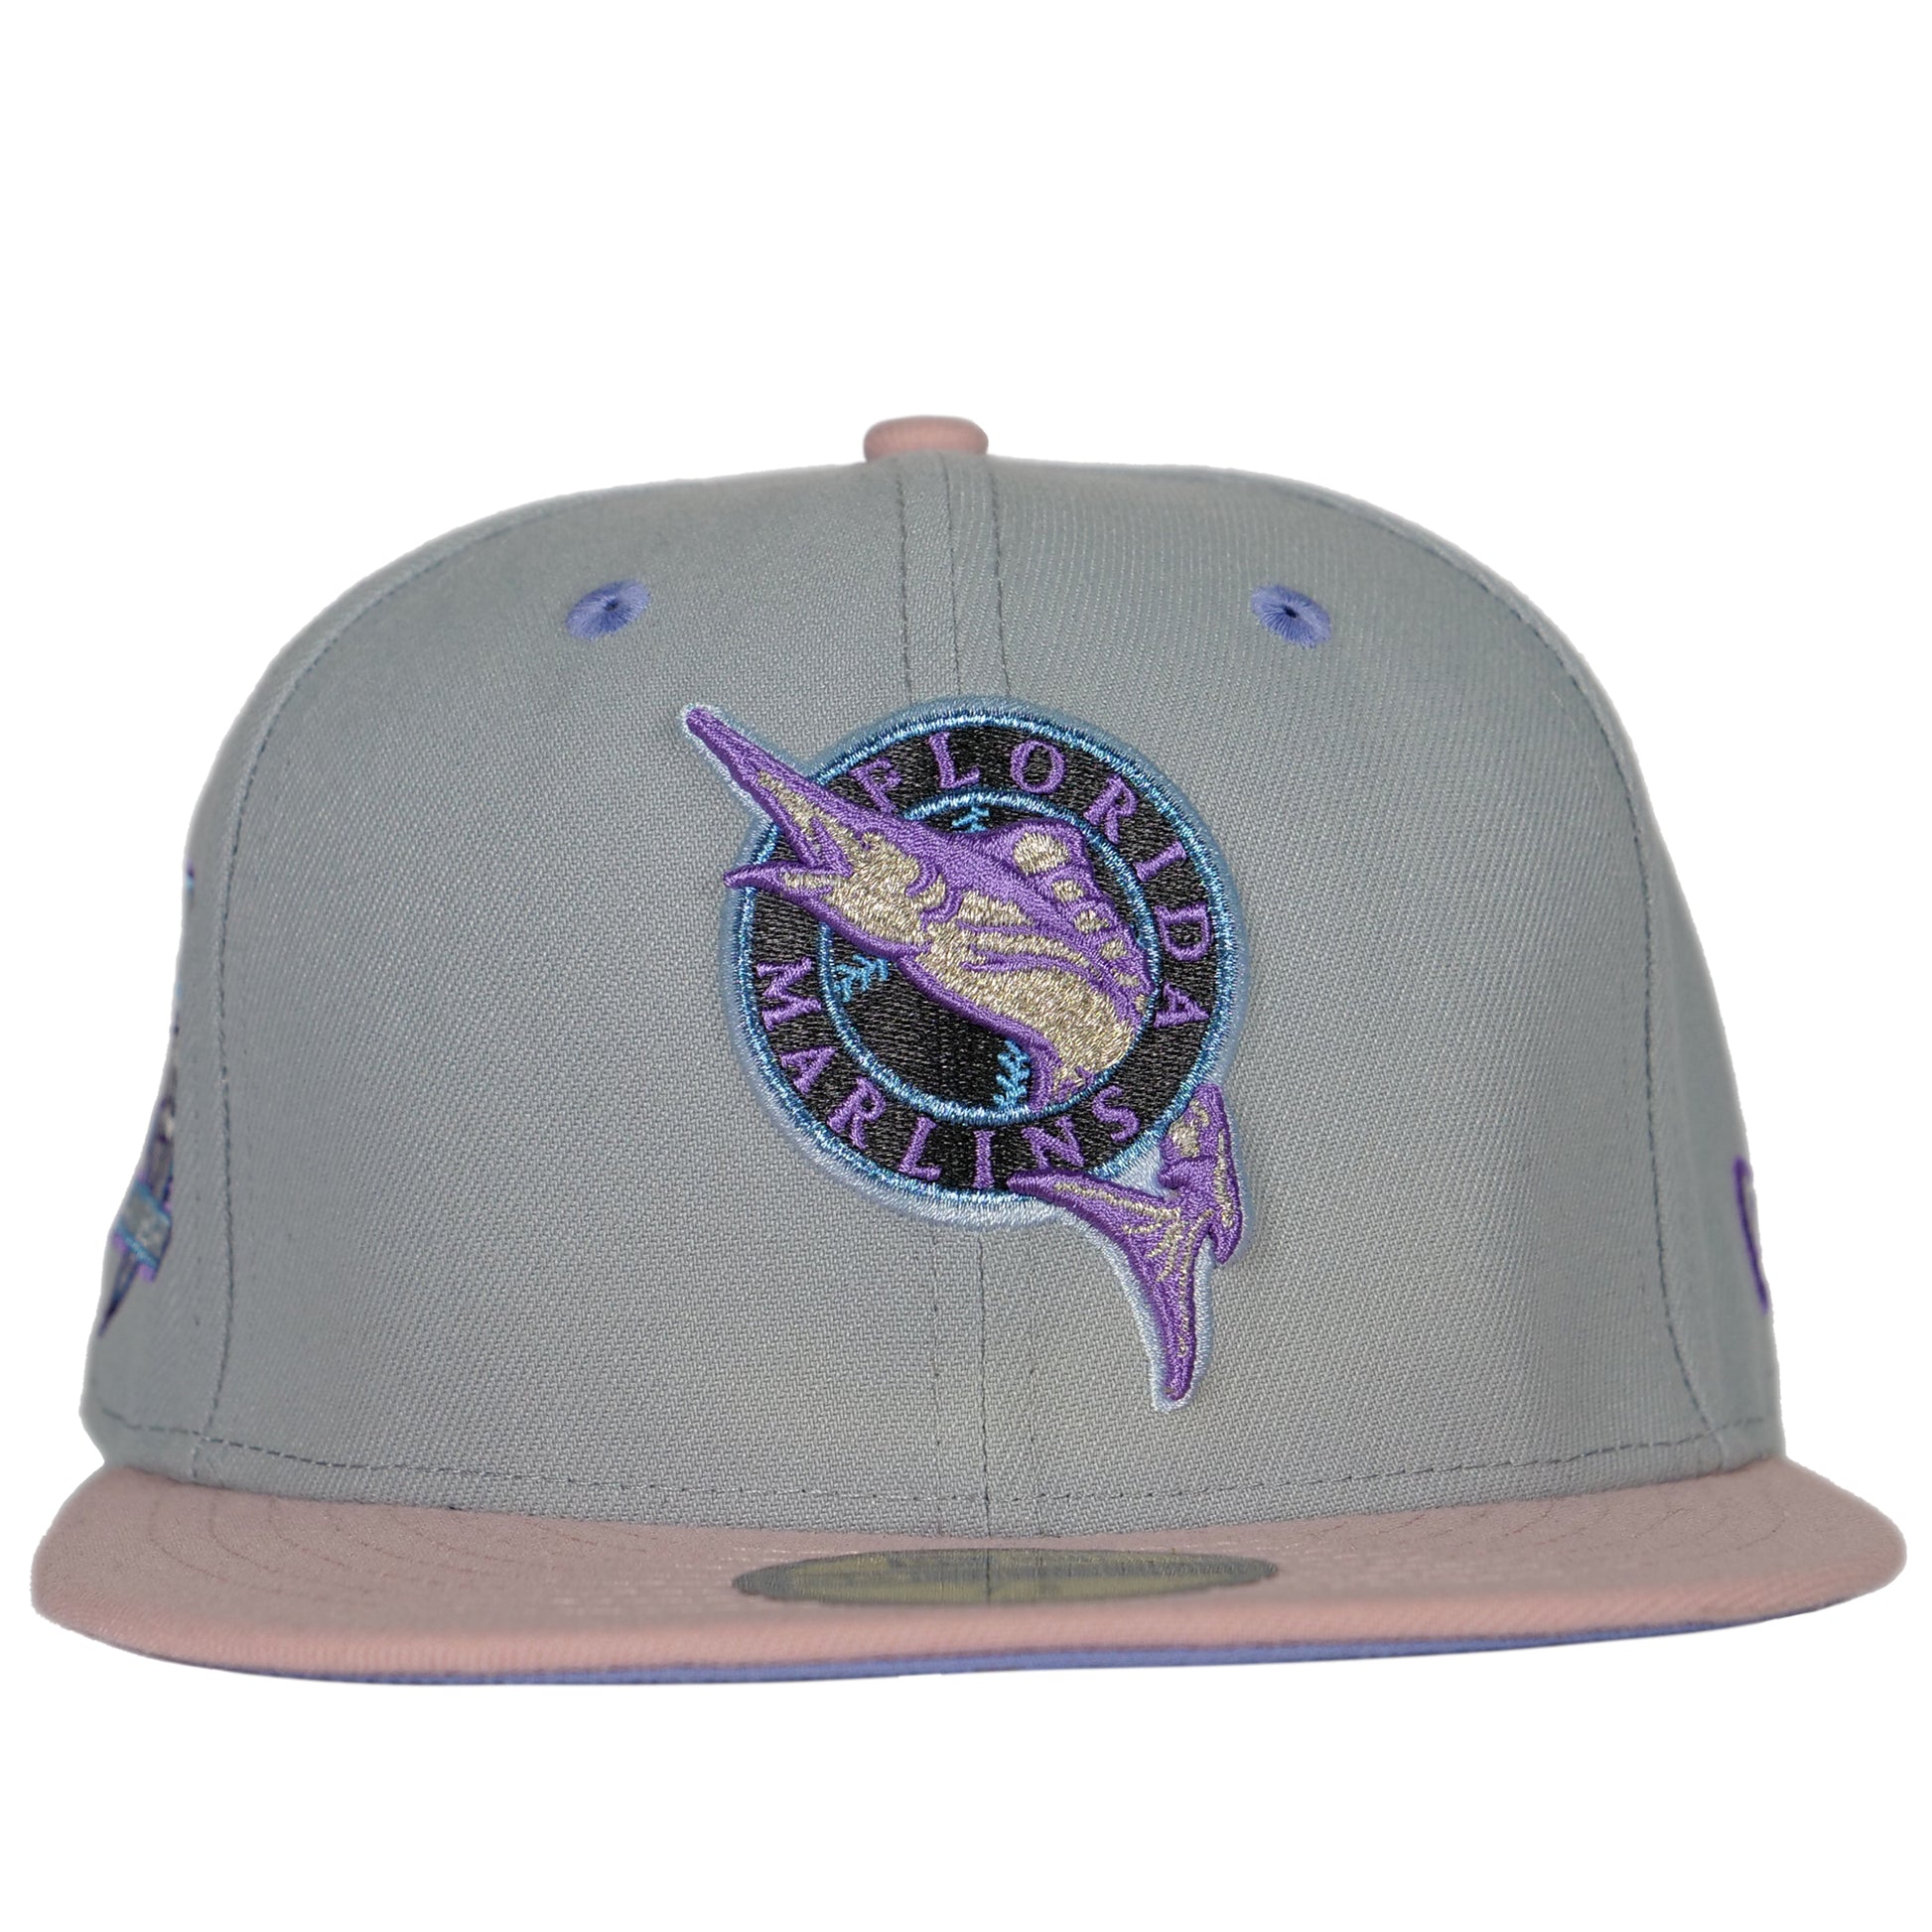 Miami Marlins 2 Tone Color Pack 2021 New Era 59Fifty Fitted Hat Purple